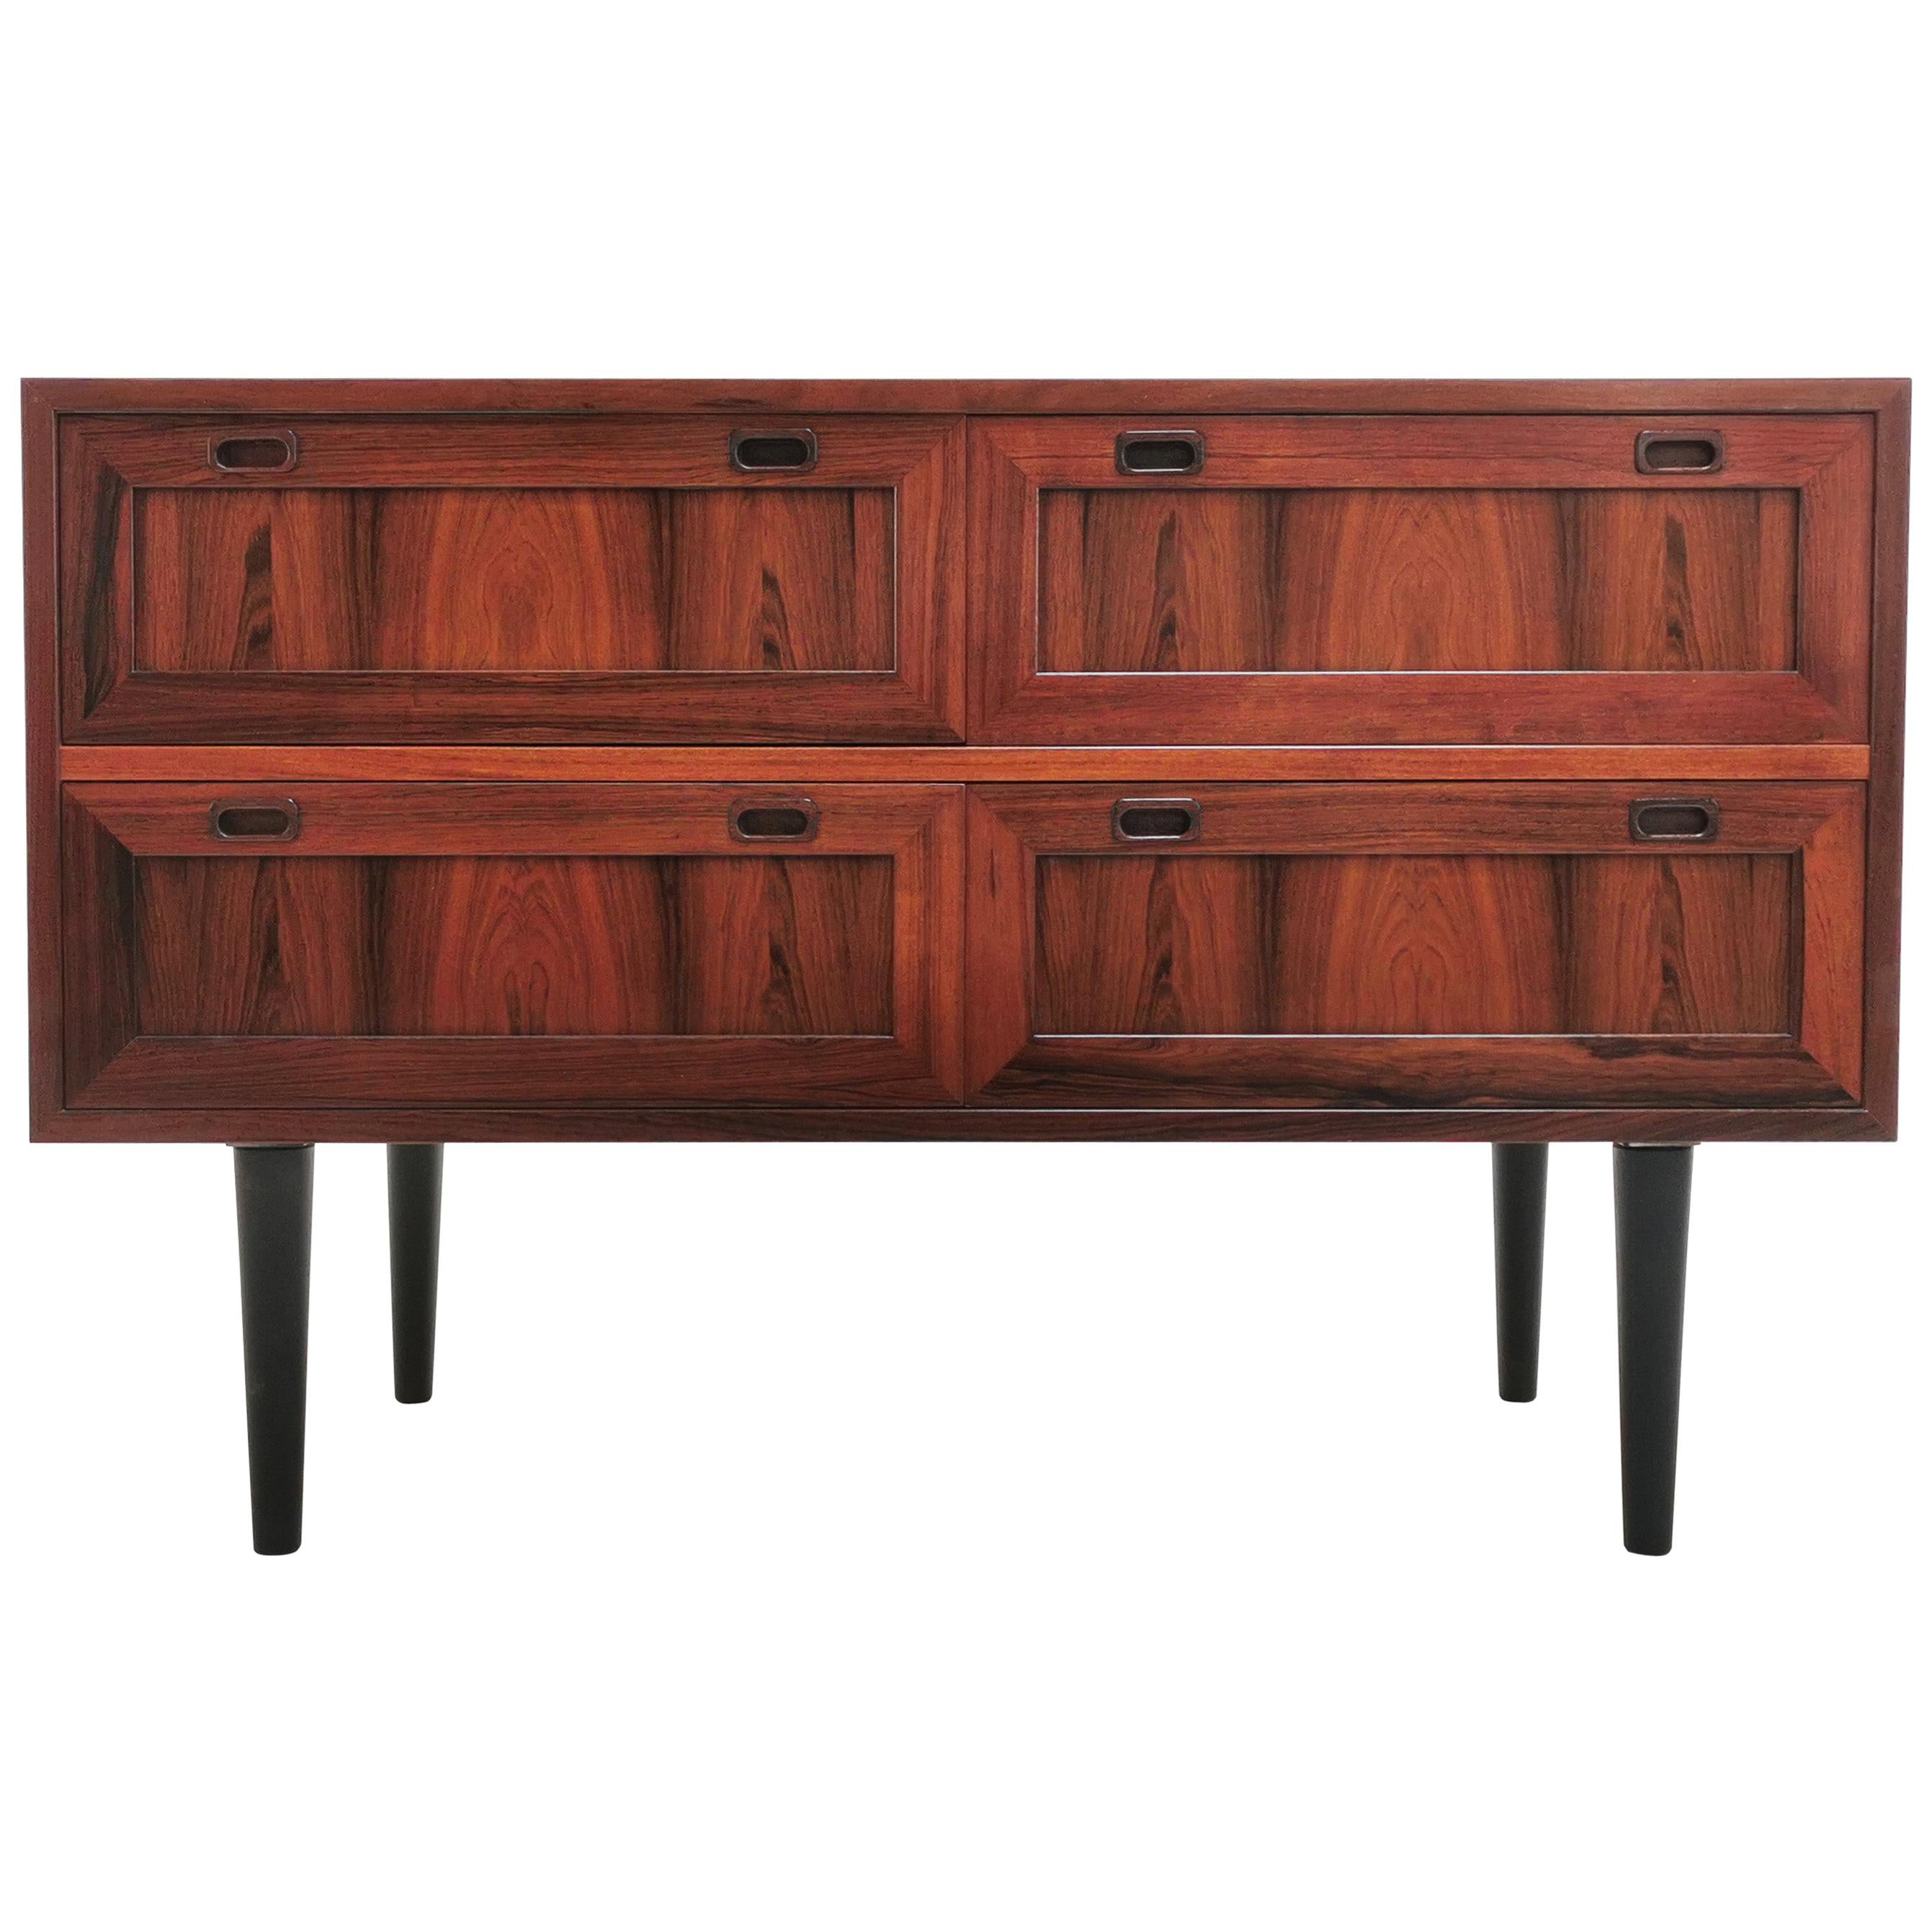 Danish Sejling Skabe Midcentury Rosewood Vintage Chest of Drawers, 1970s